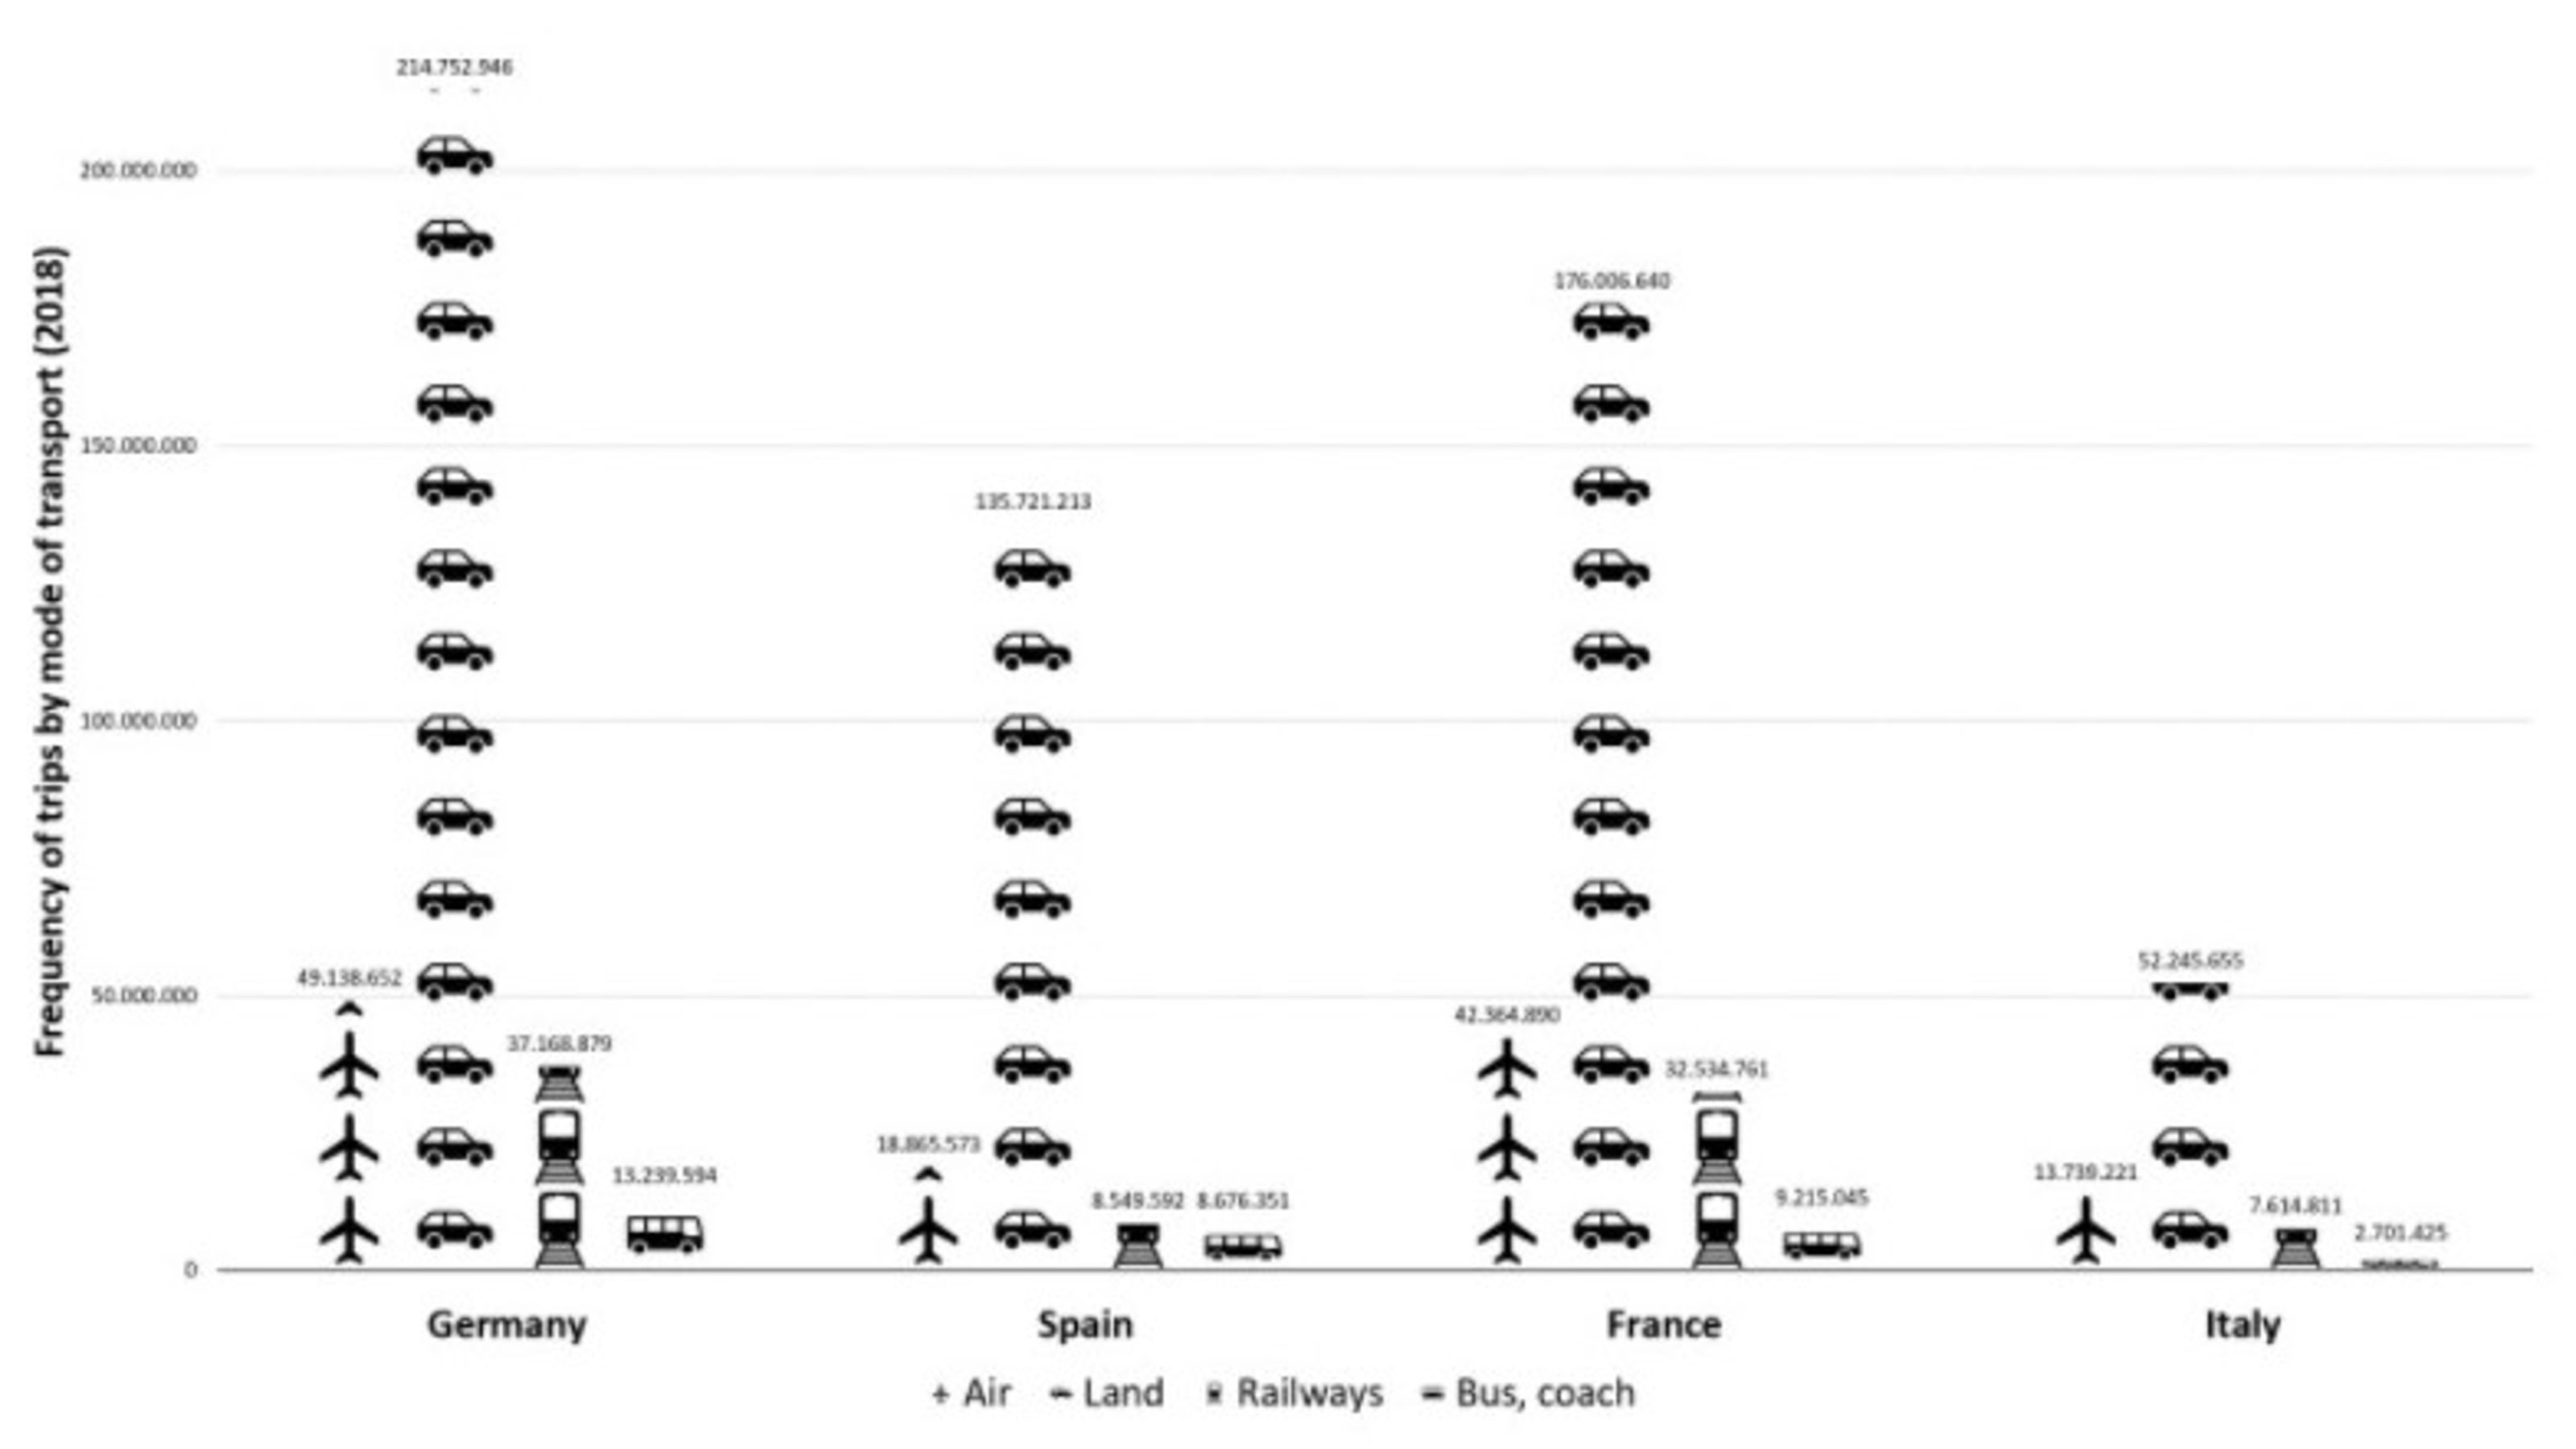 Pictogram with stacked icons of aeroplanes, cars, trains, and busses comparing usage of these modes of transport in Germany, Spain, France, and Italy.